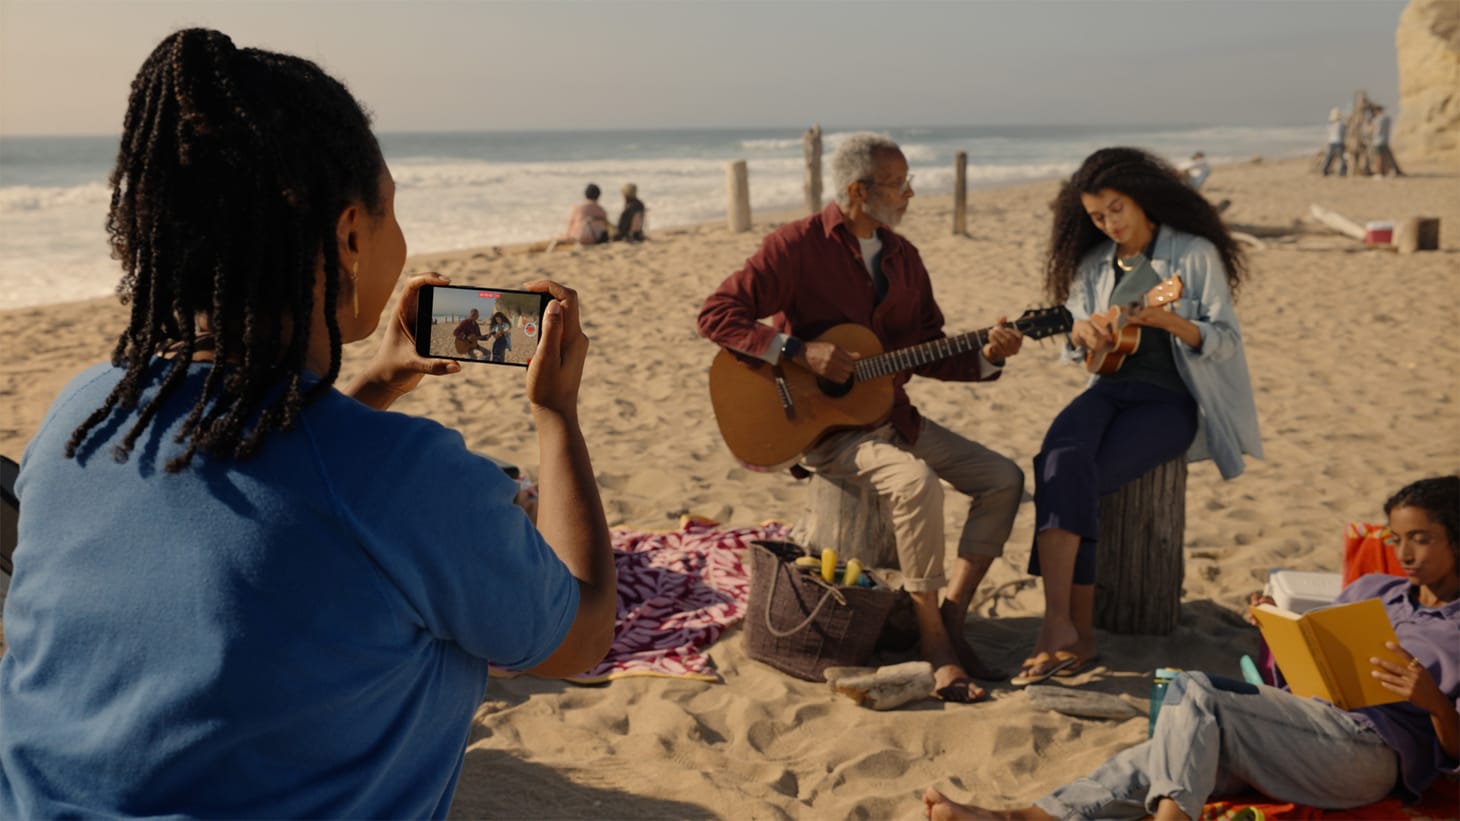 Beach scene with two guitar players while a woman videos on her iPhone.